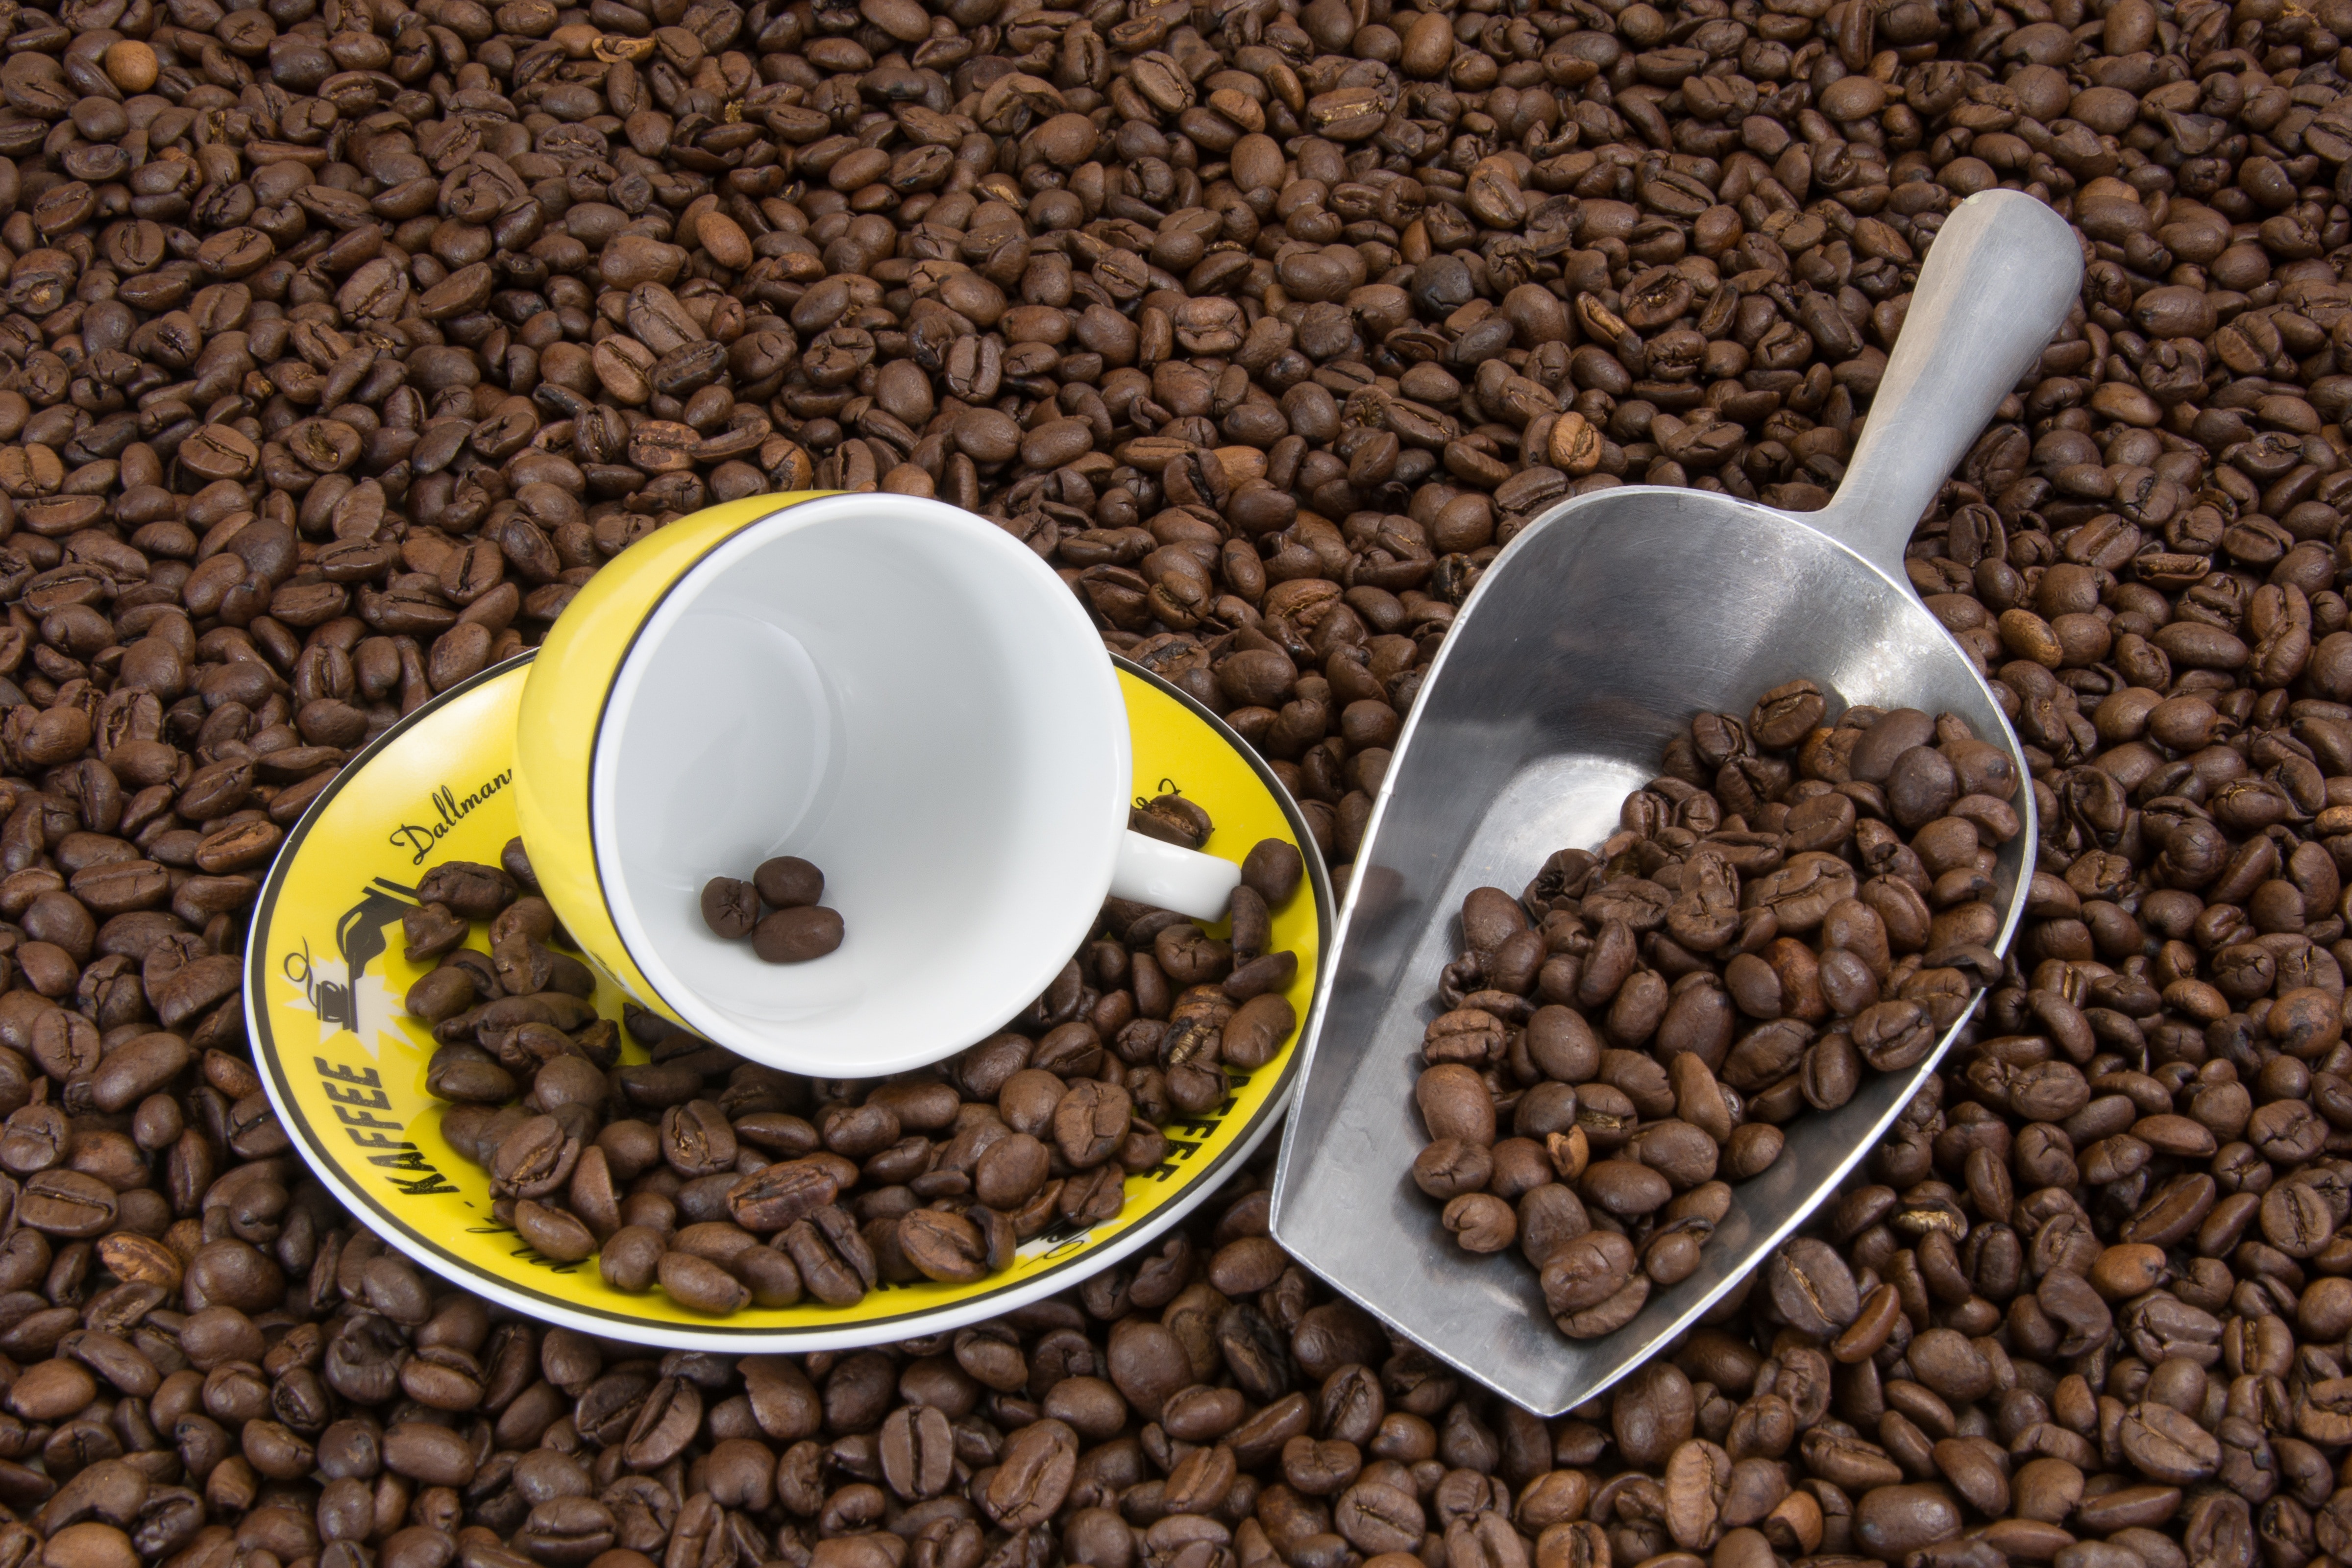 stainless steel coffee shovel, yellow ceramic teacup, saucer and coffee bean lot